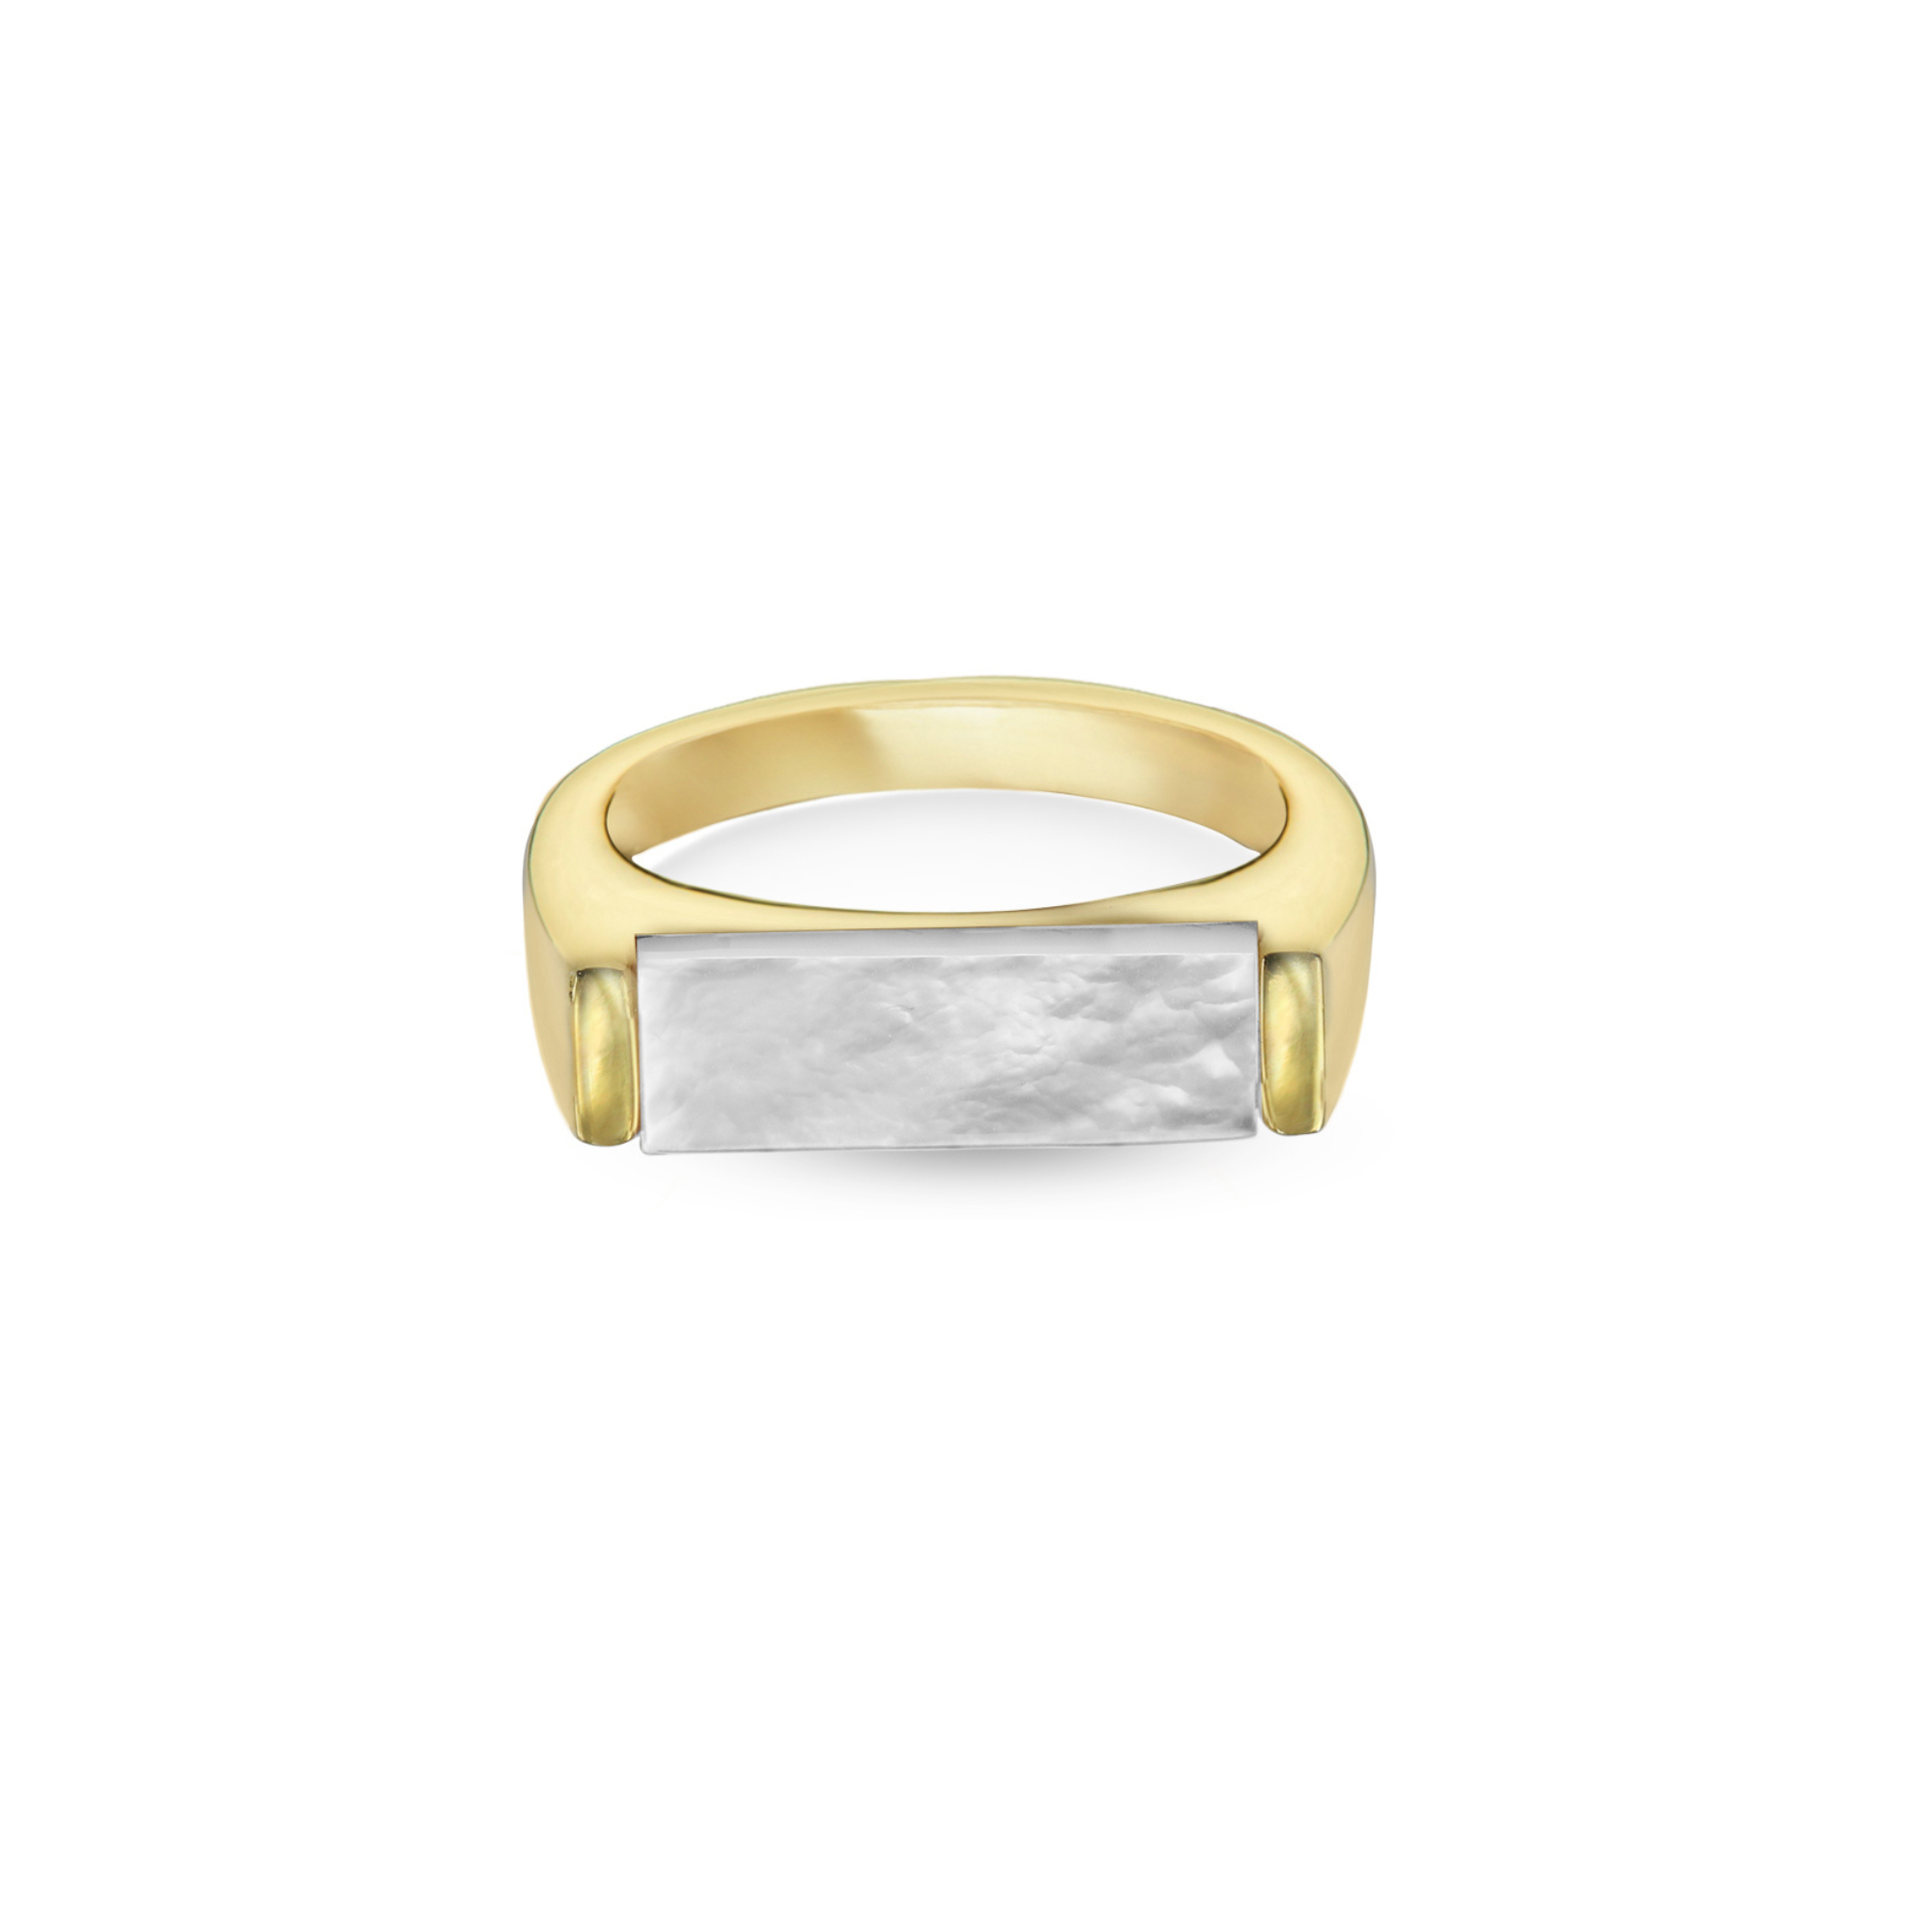 THE ELLE MOTHER OF PEARL RING